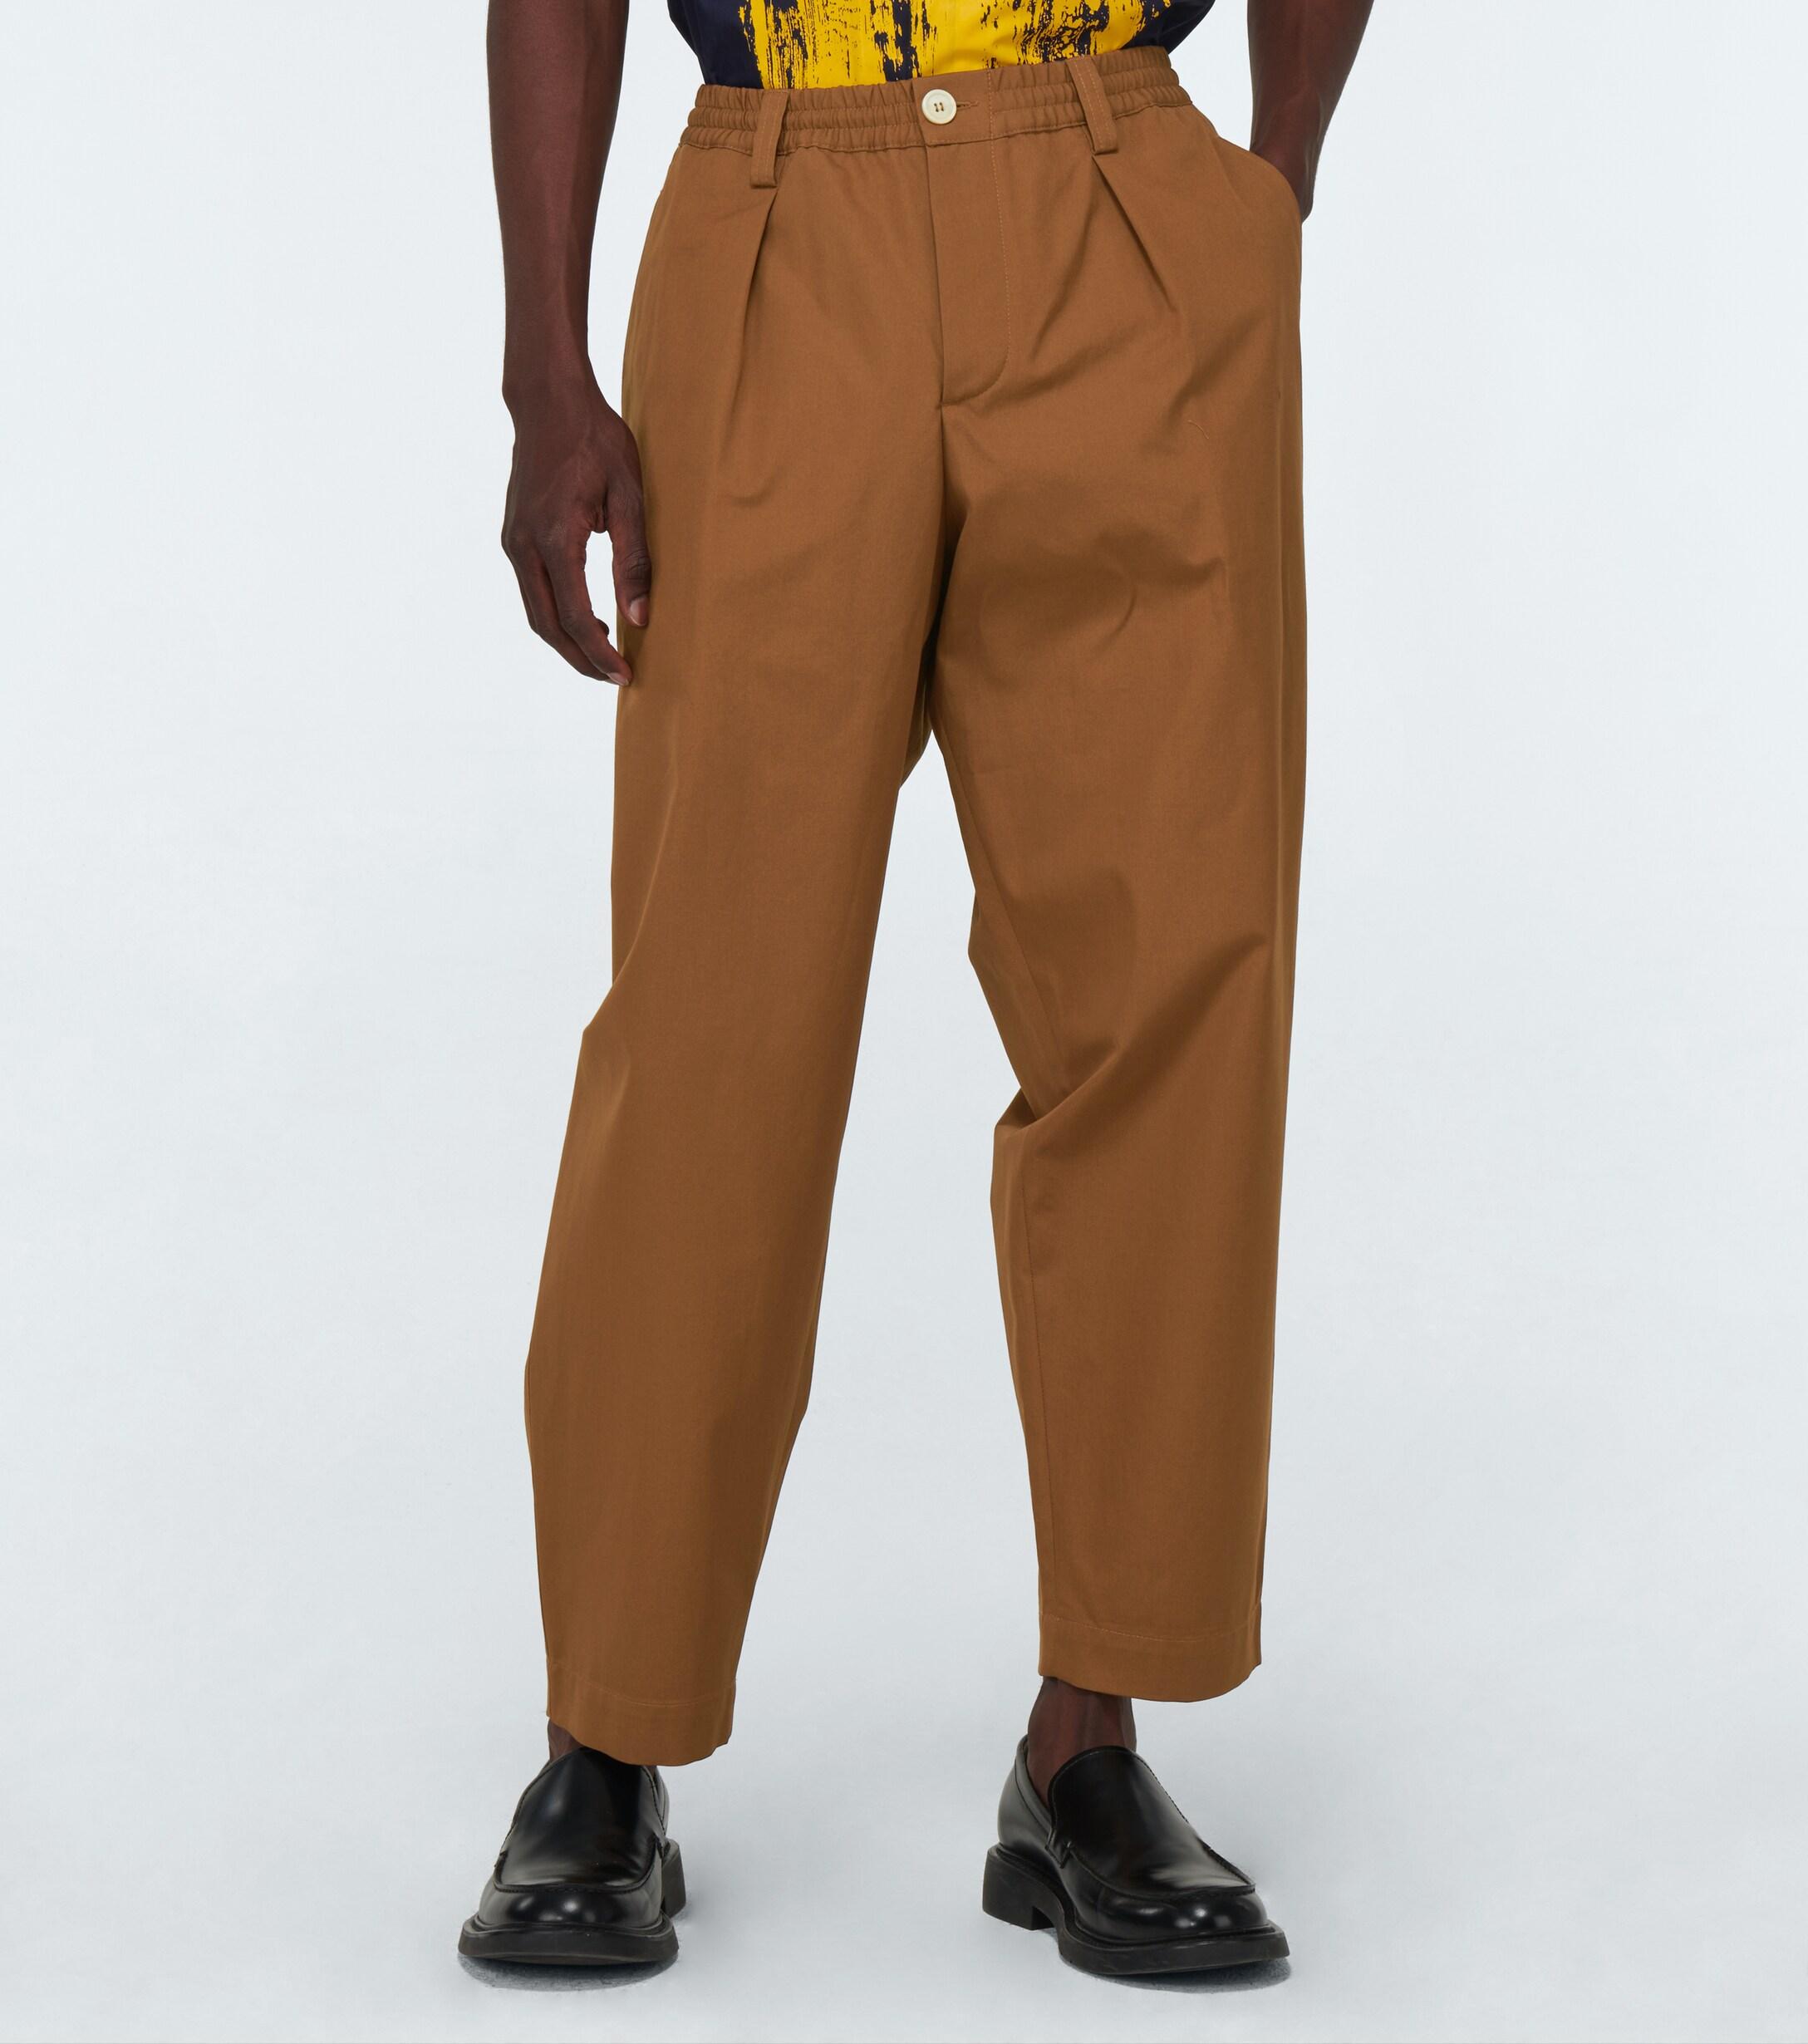 Marni Loose-fit Cotton Pants in Brown for Men - Lyst